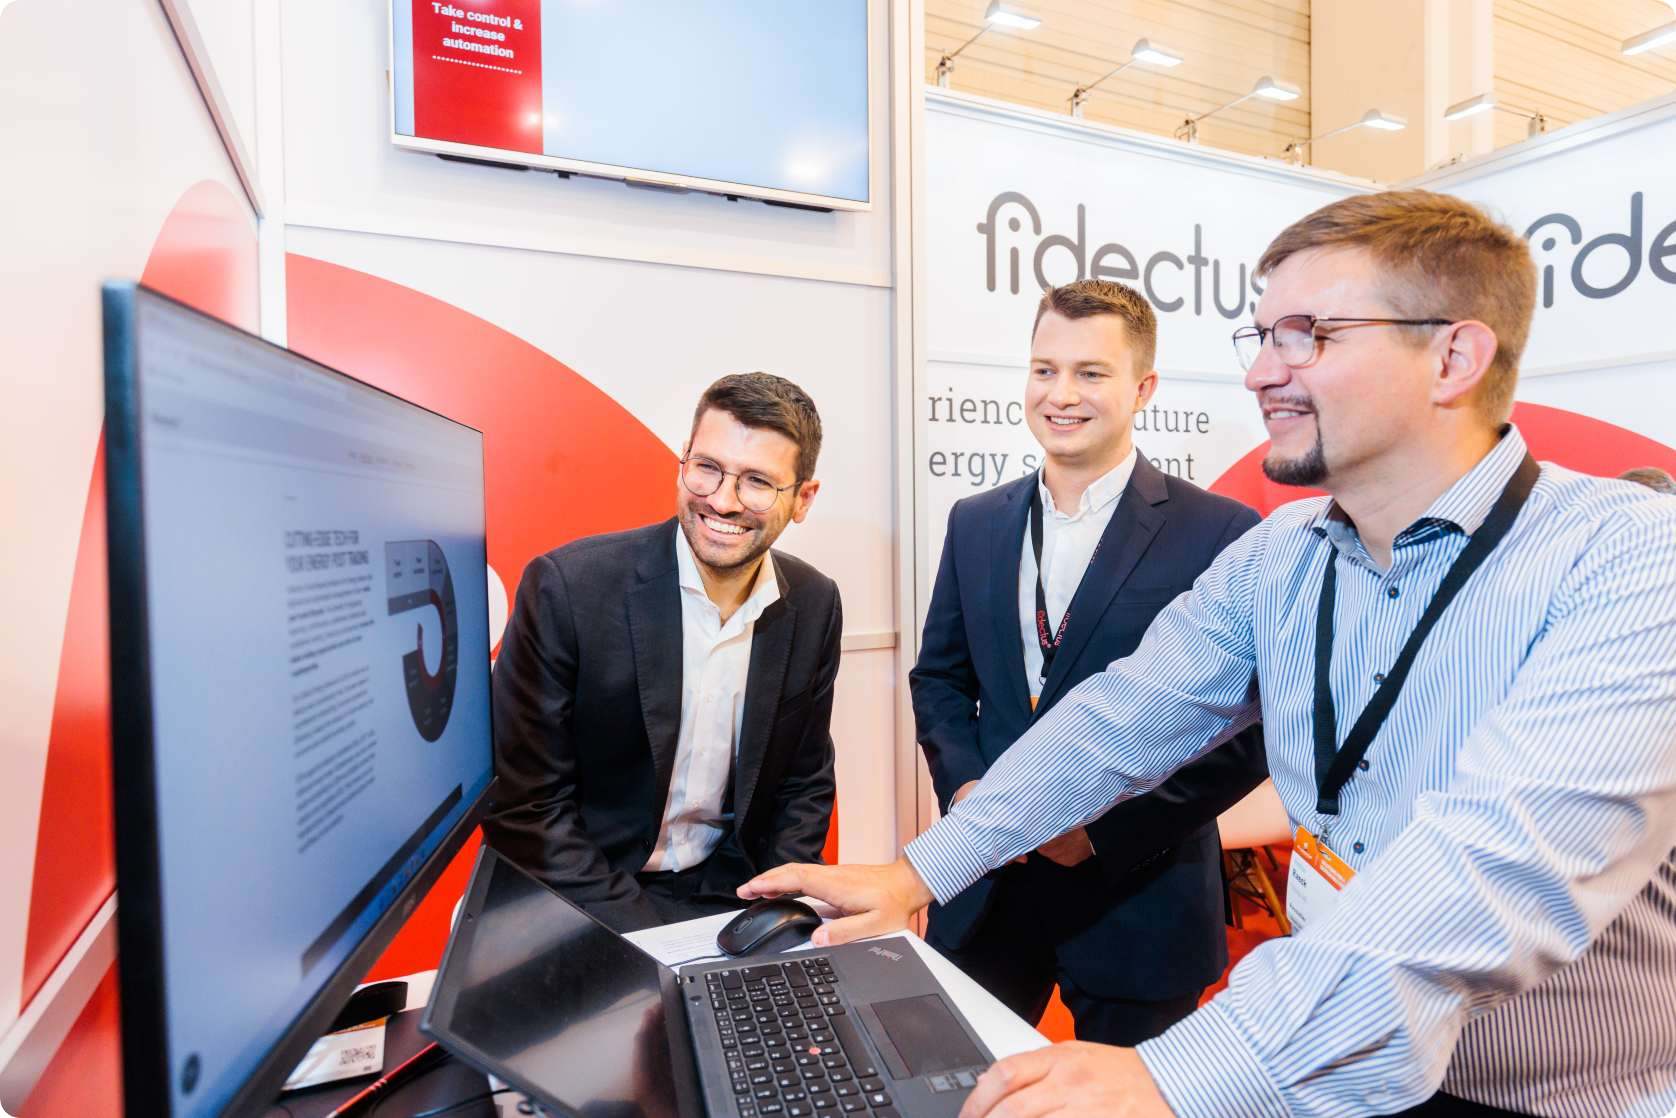 Fidectus team at an event